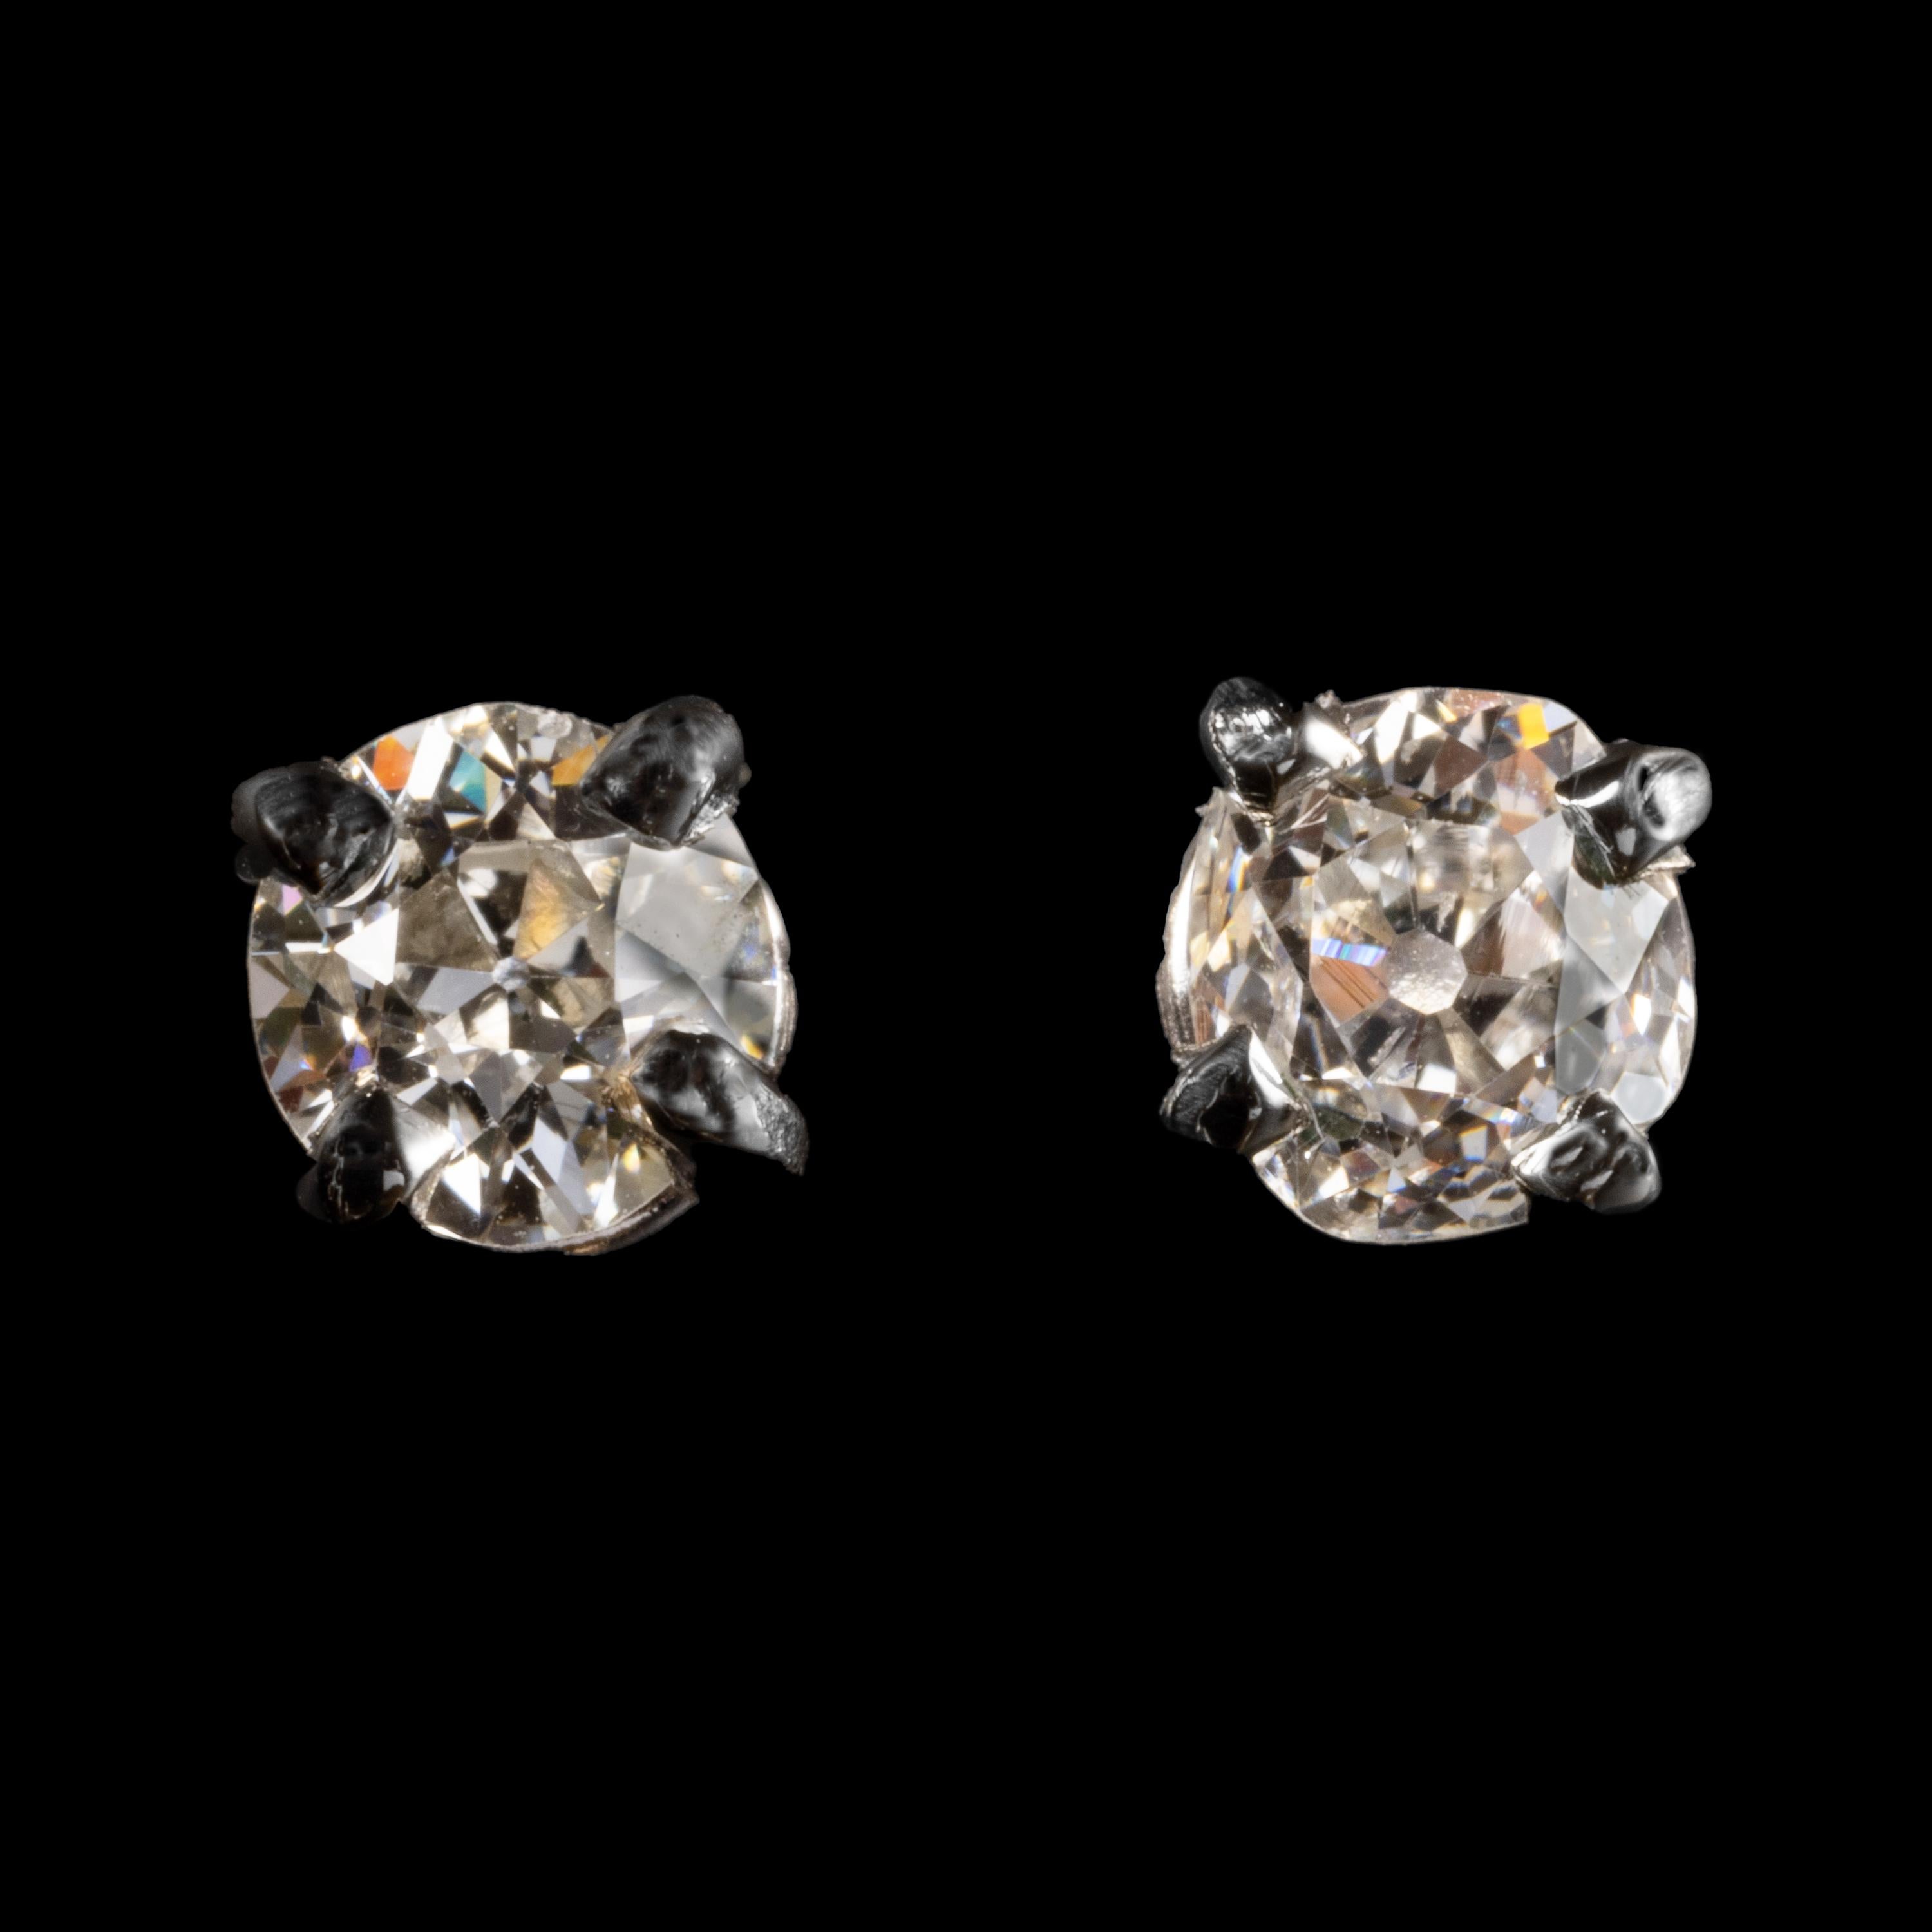 So simple yet so elusive: stud earrings featuring antique old-mine diamonds. This lovely pair features two well-marched old-mine diamonds that are bright and near-colorless (G/I) and quite clean (VS2/SI1). They are filled with fire and each was